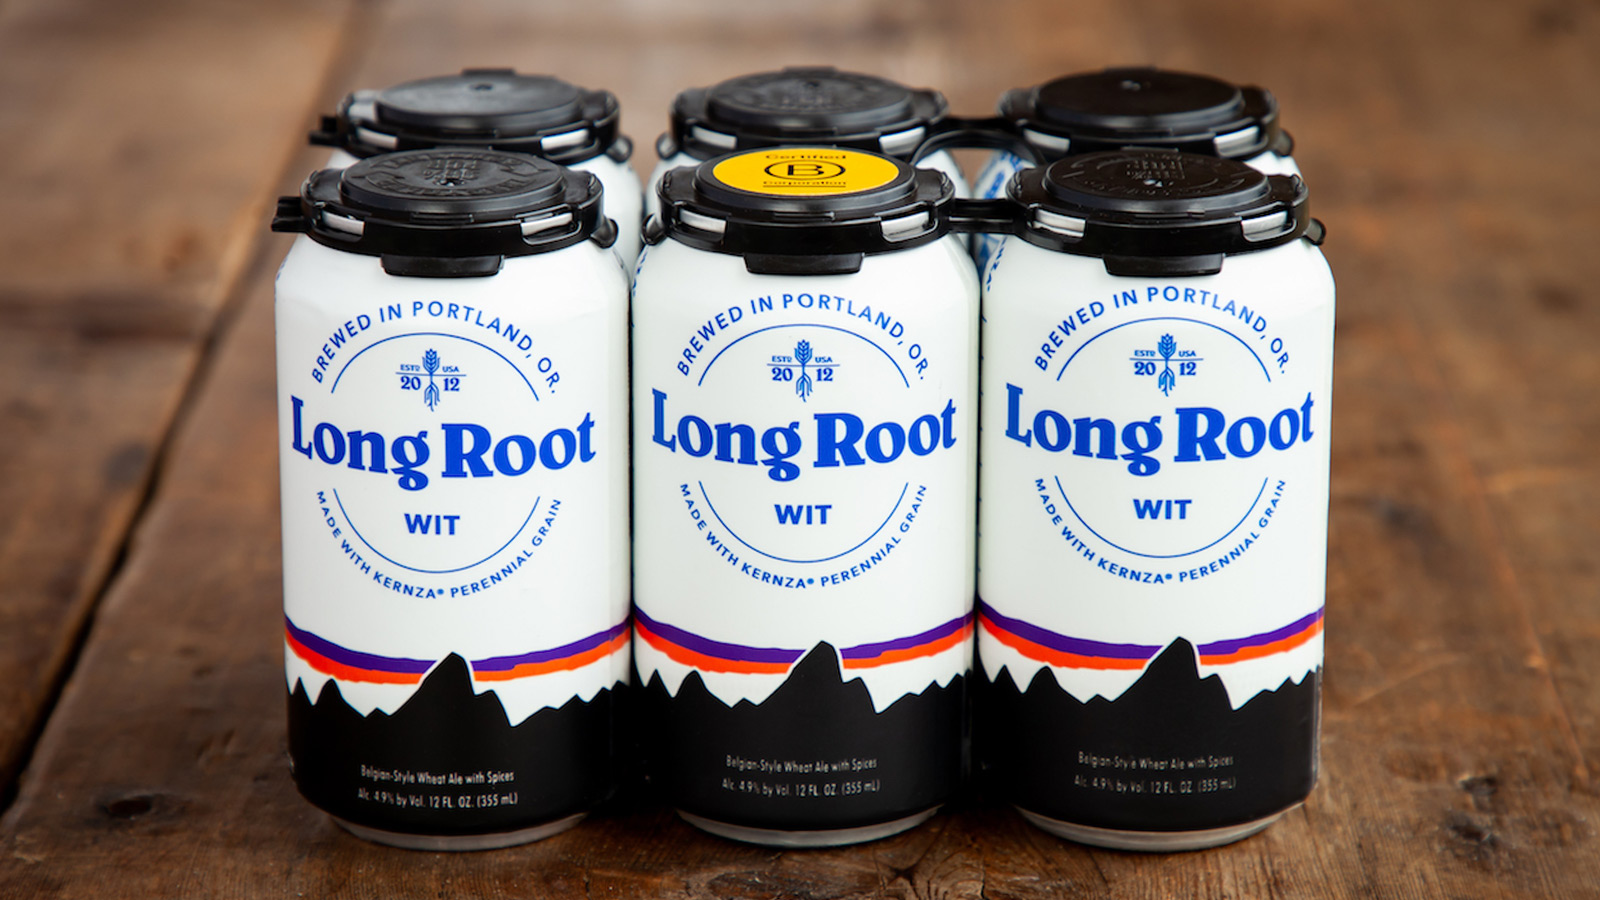 Patagonia Provisions Long Root Wit Beer